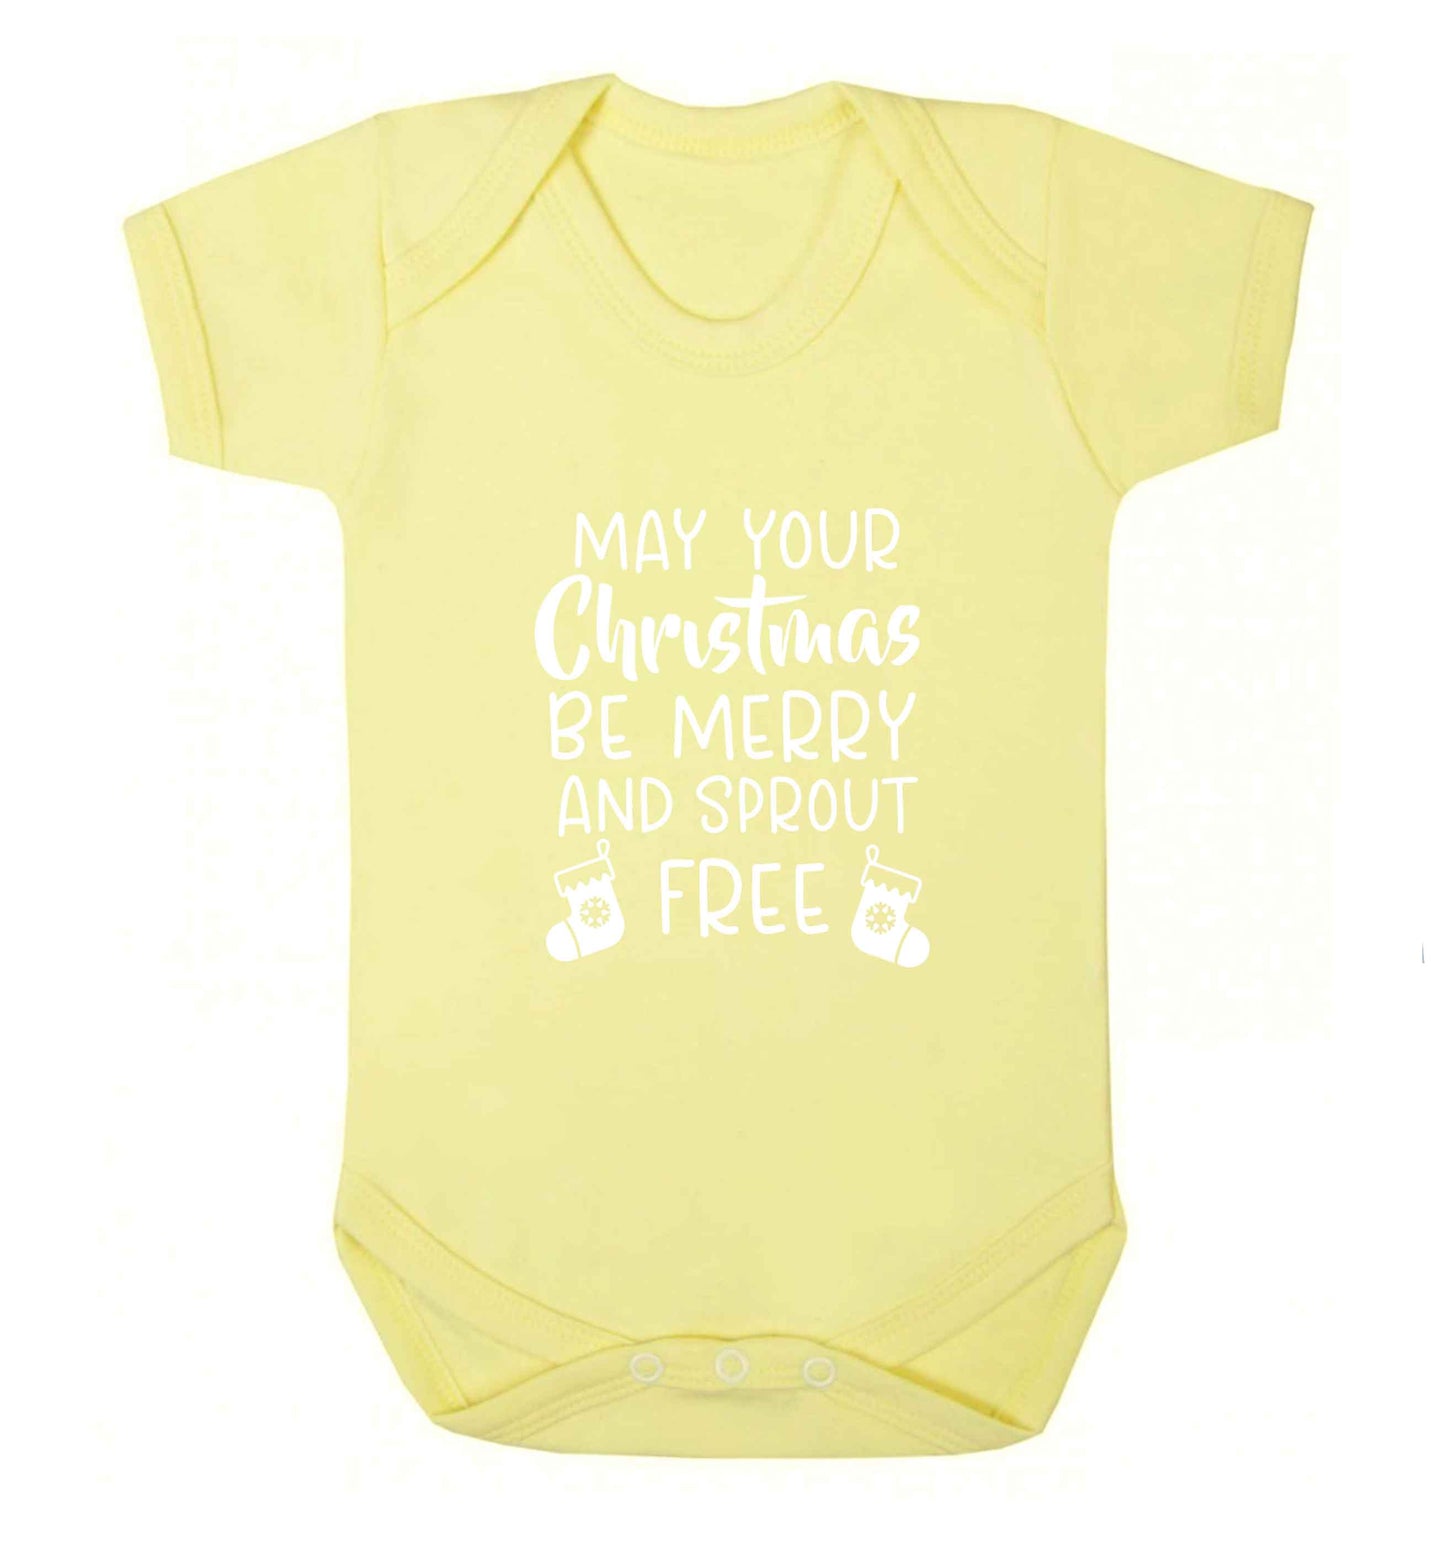 May your Christmas be merry and sprout free baby vest pale yellow 18-24 months